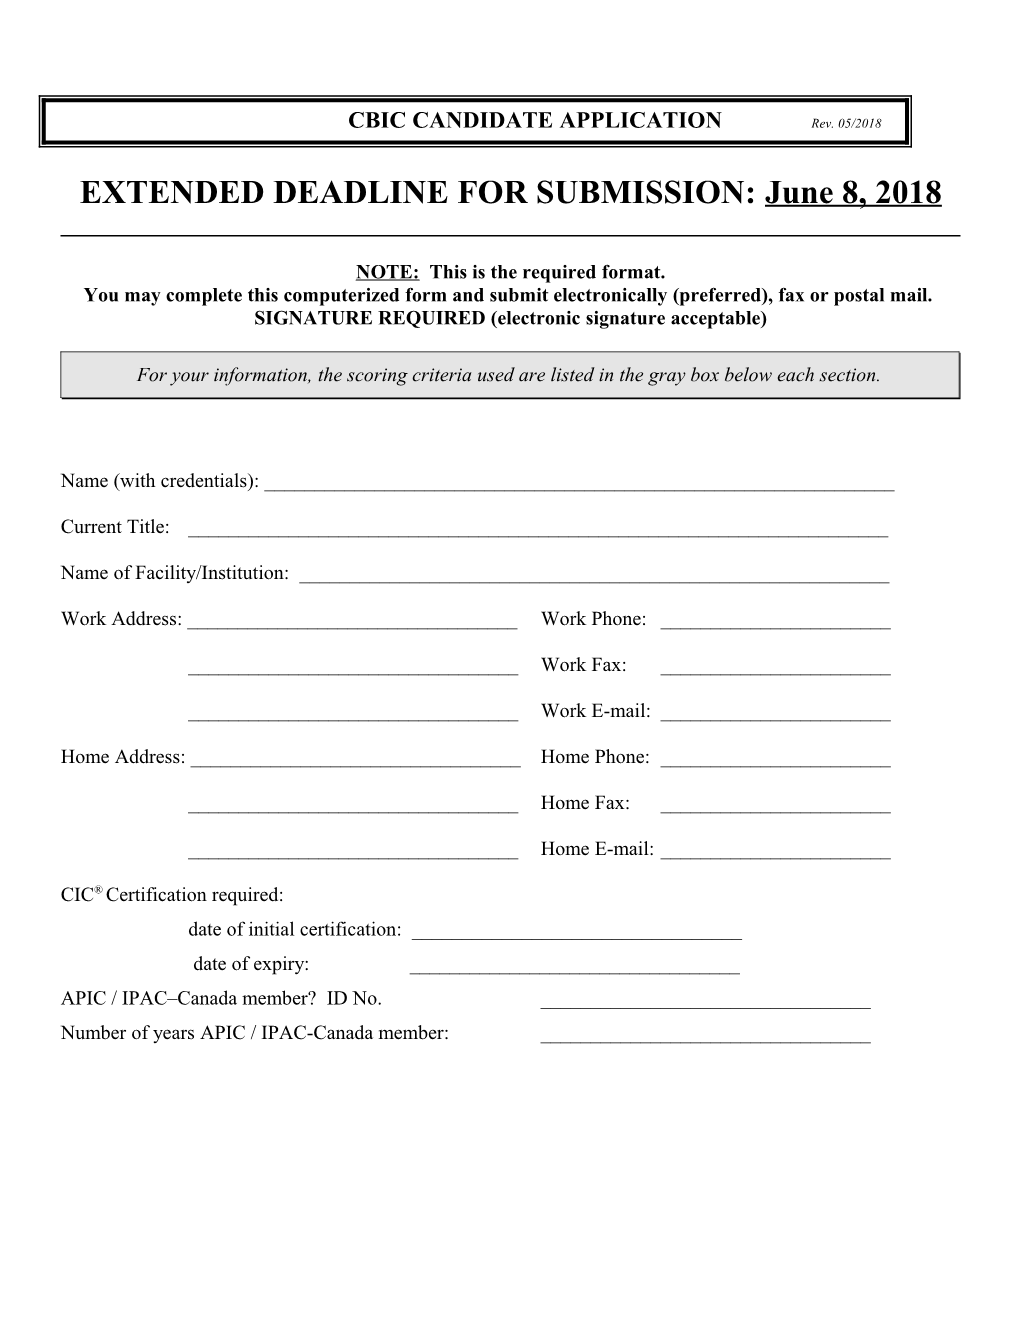 EXTENDED DEADLINE for SUBMISSION:June 8, 2018